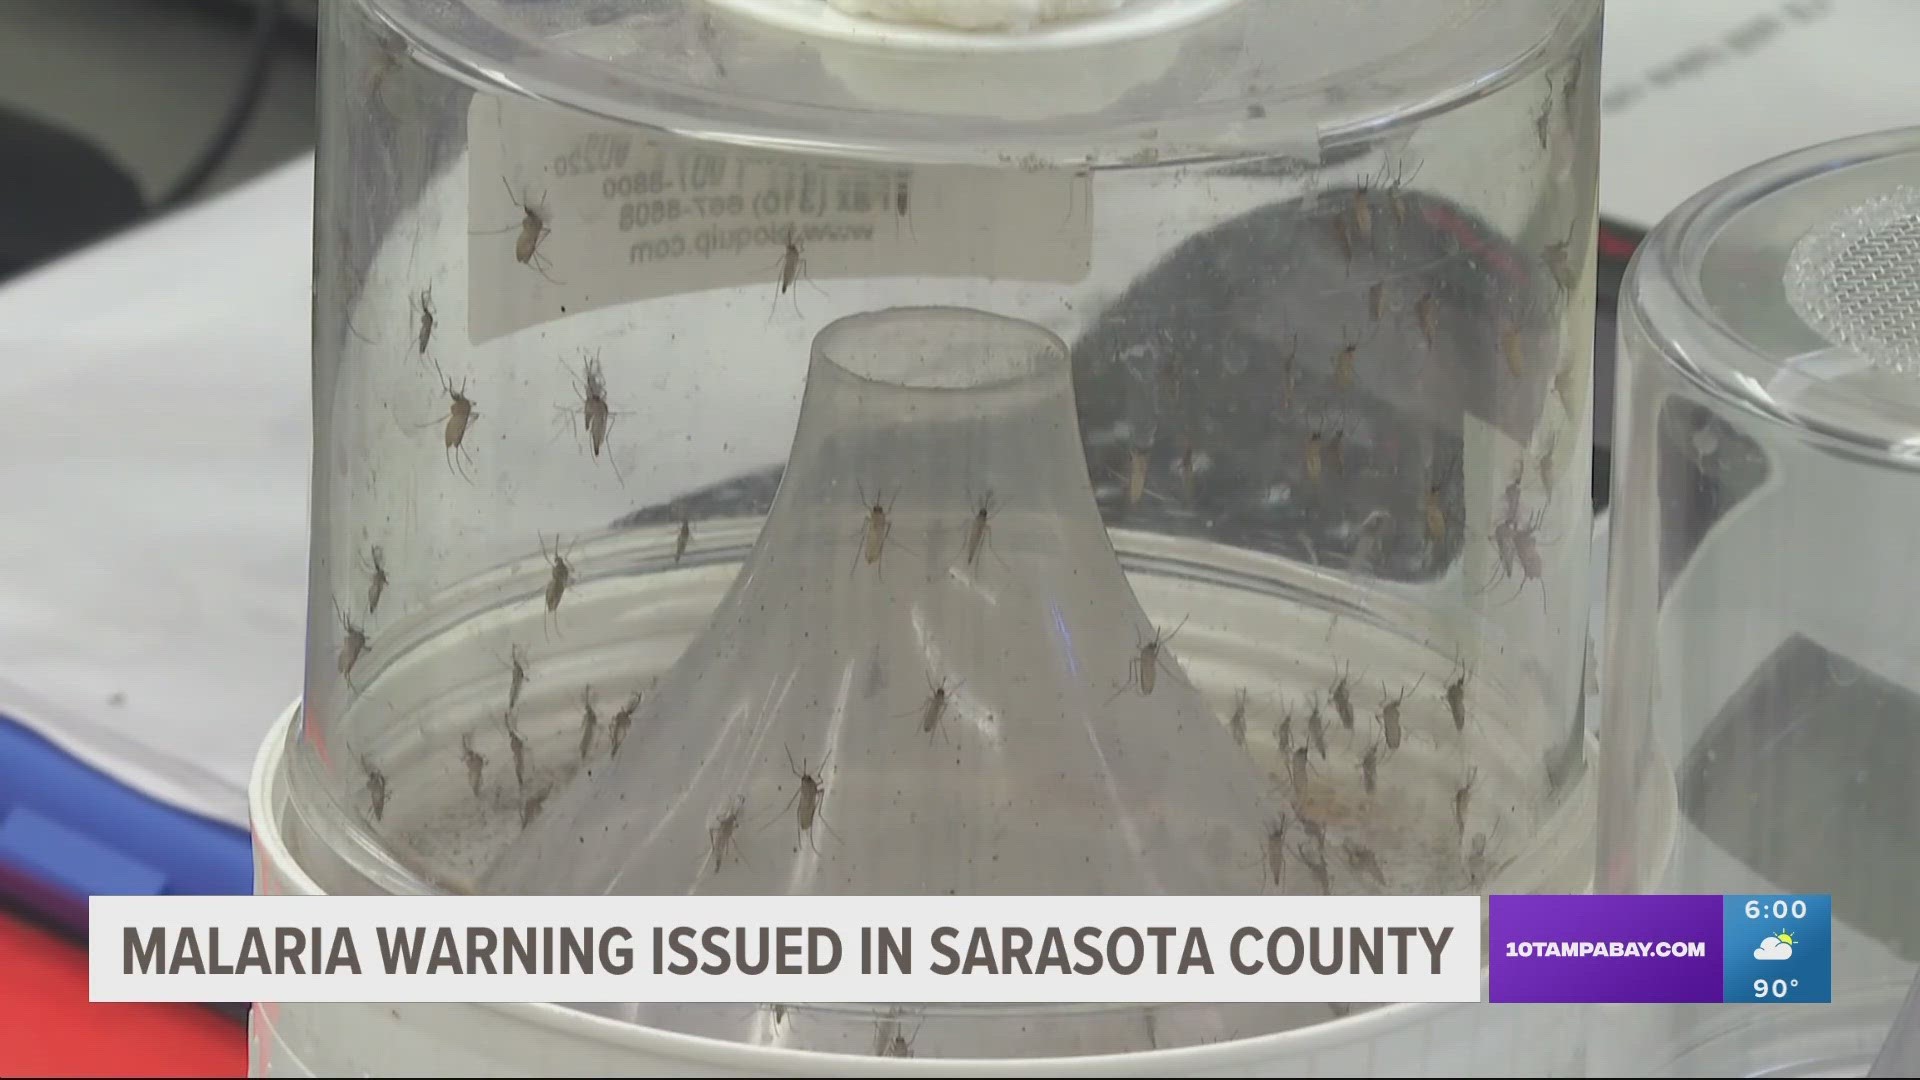 A health alert has been issued for Sarasota and Manatee counties due to two confirmed cases of malaria.